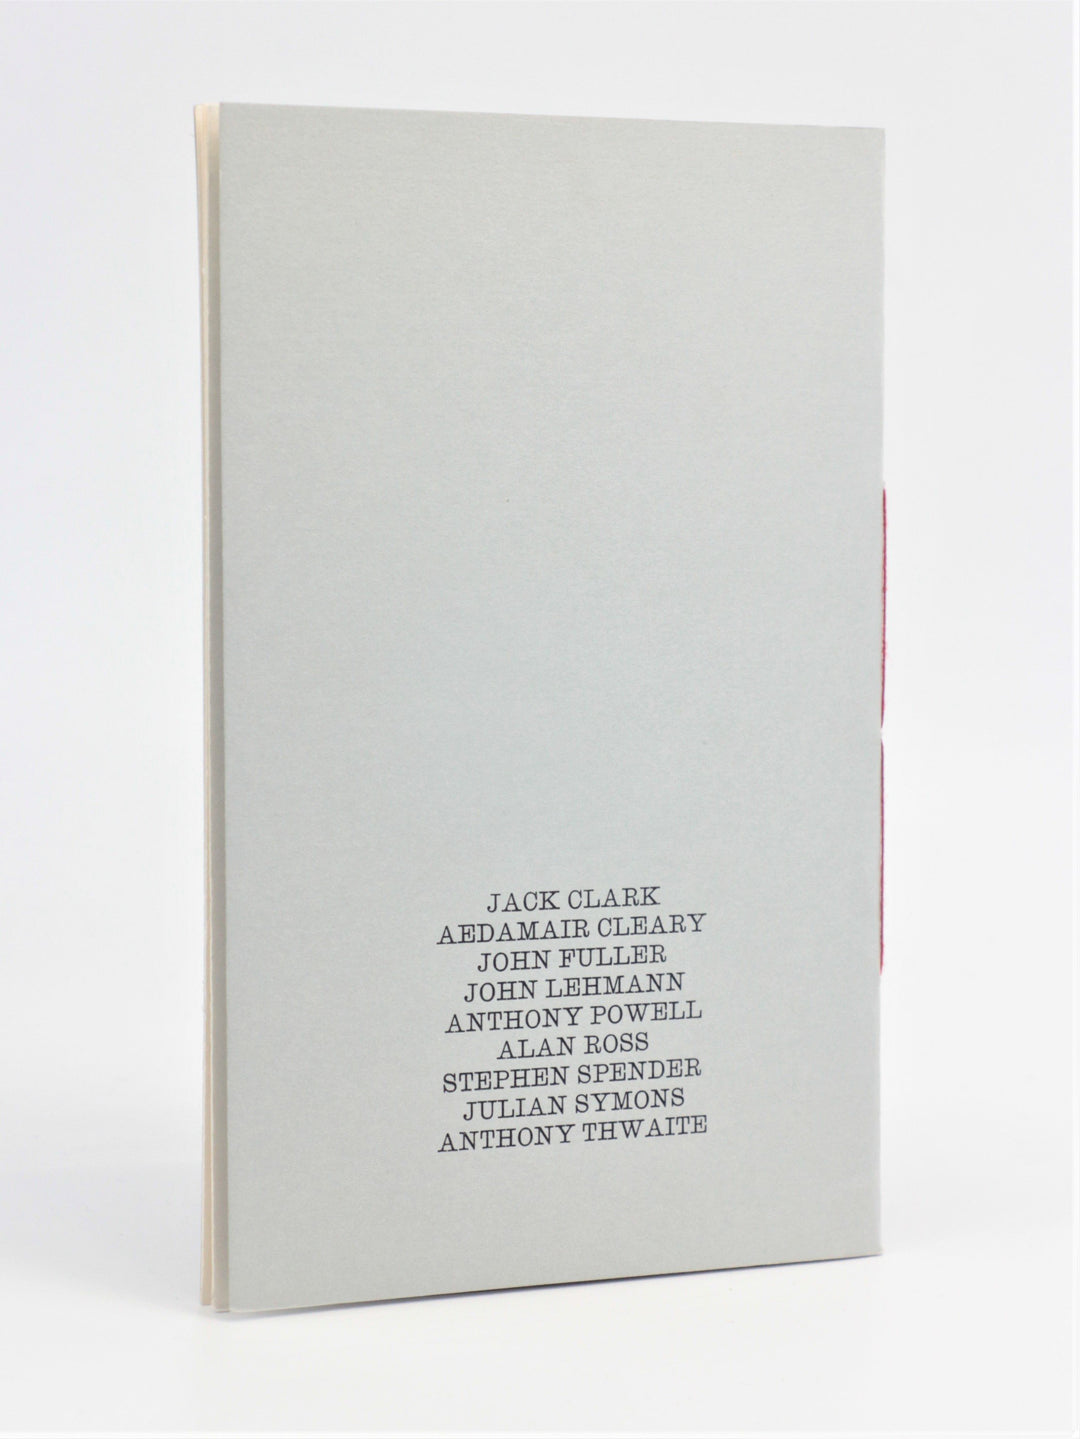 Powell, Anthony - Poems for Roy Fuller | image4